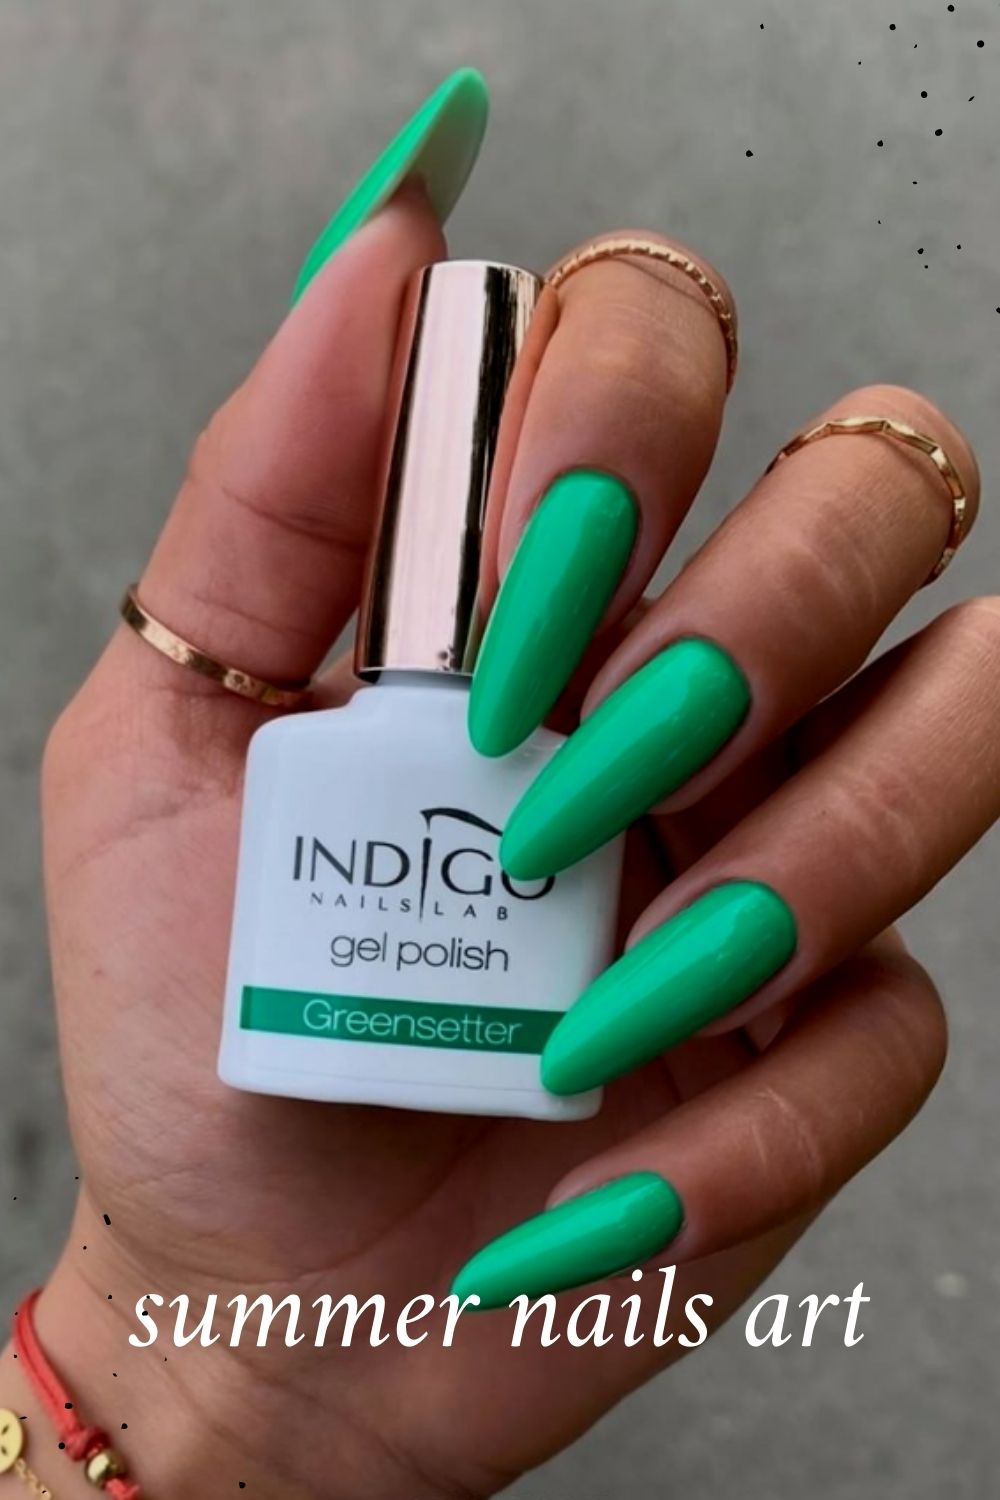 Cool green almond nails